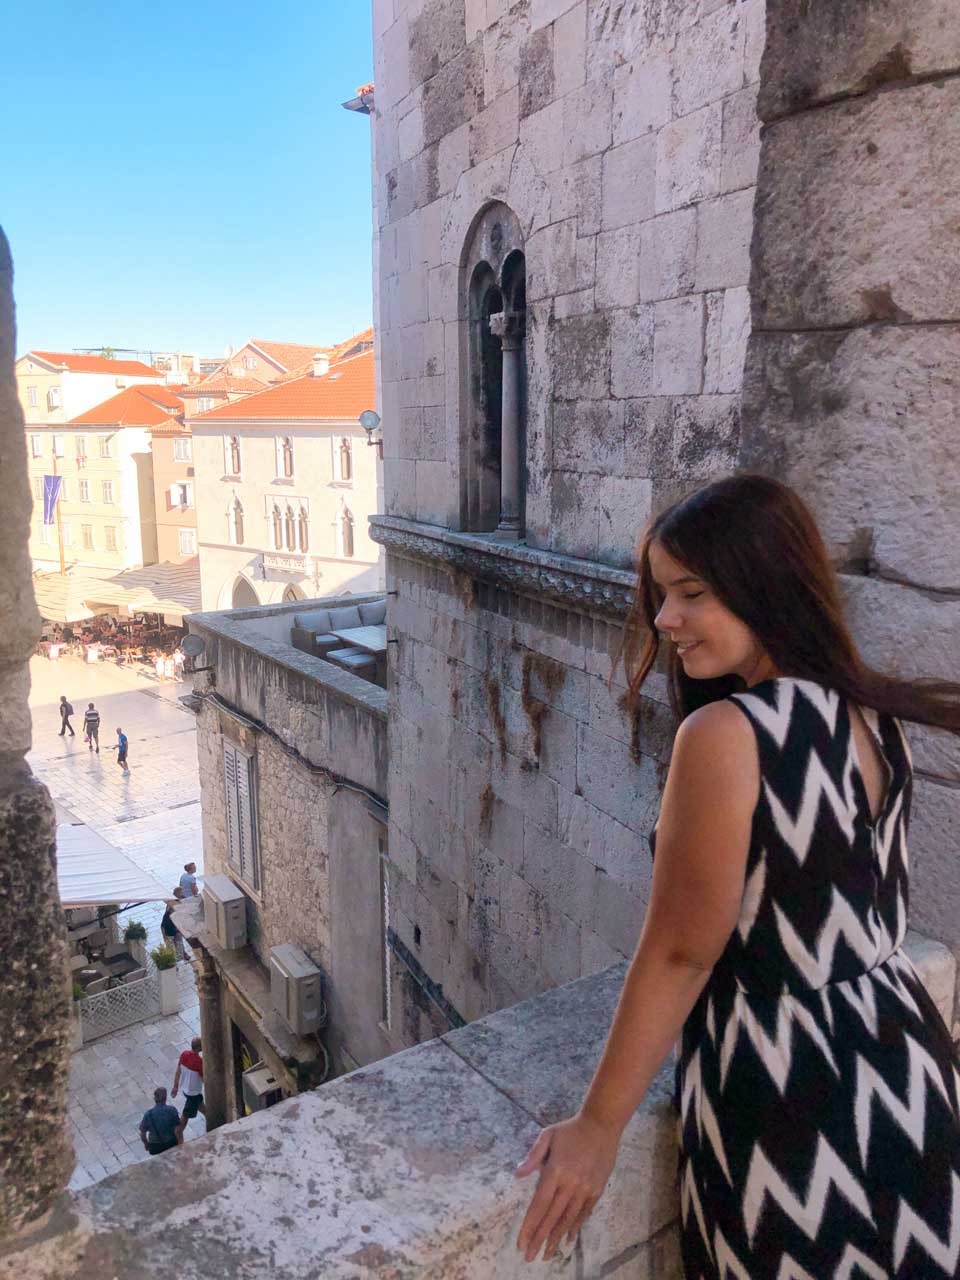 Girl in a black and white maxi dress standing on a terrace overlooking People's Square or Pjaca in Split Old Town